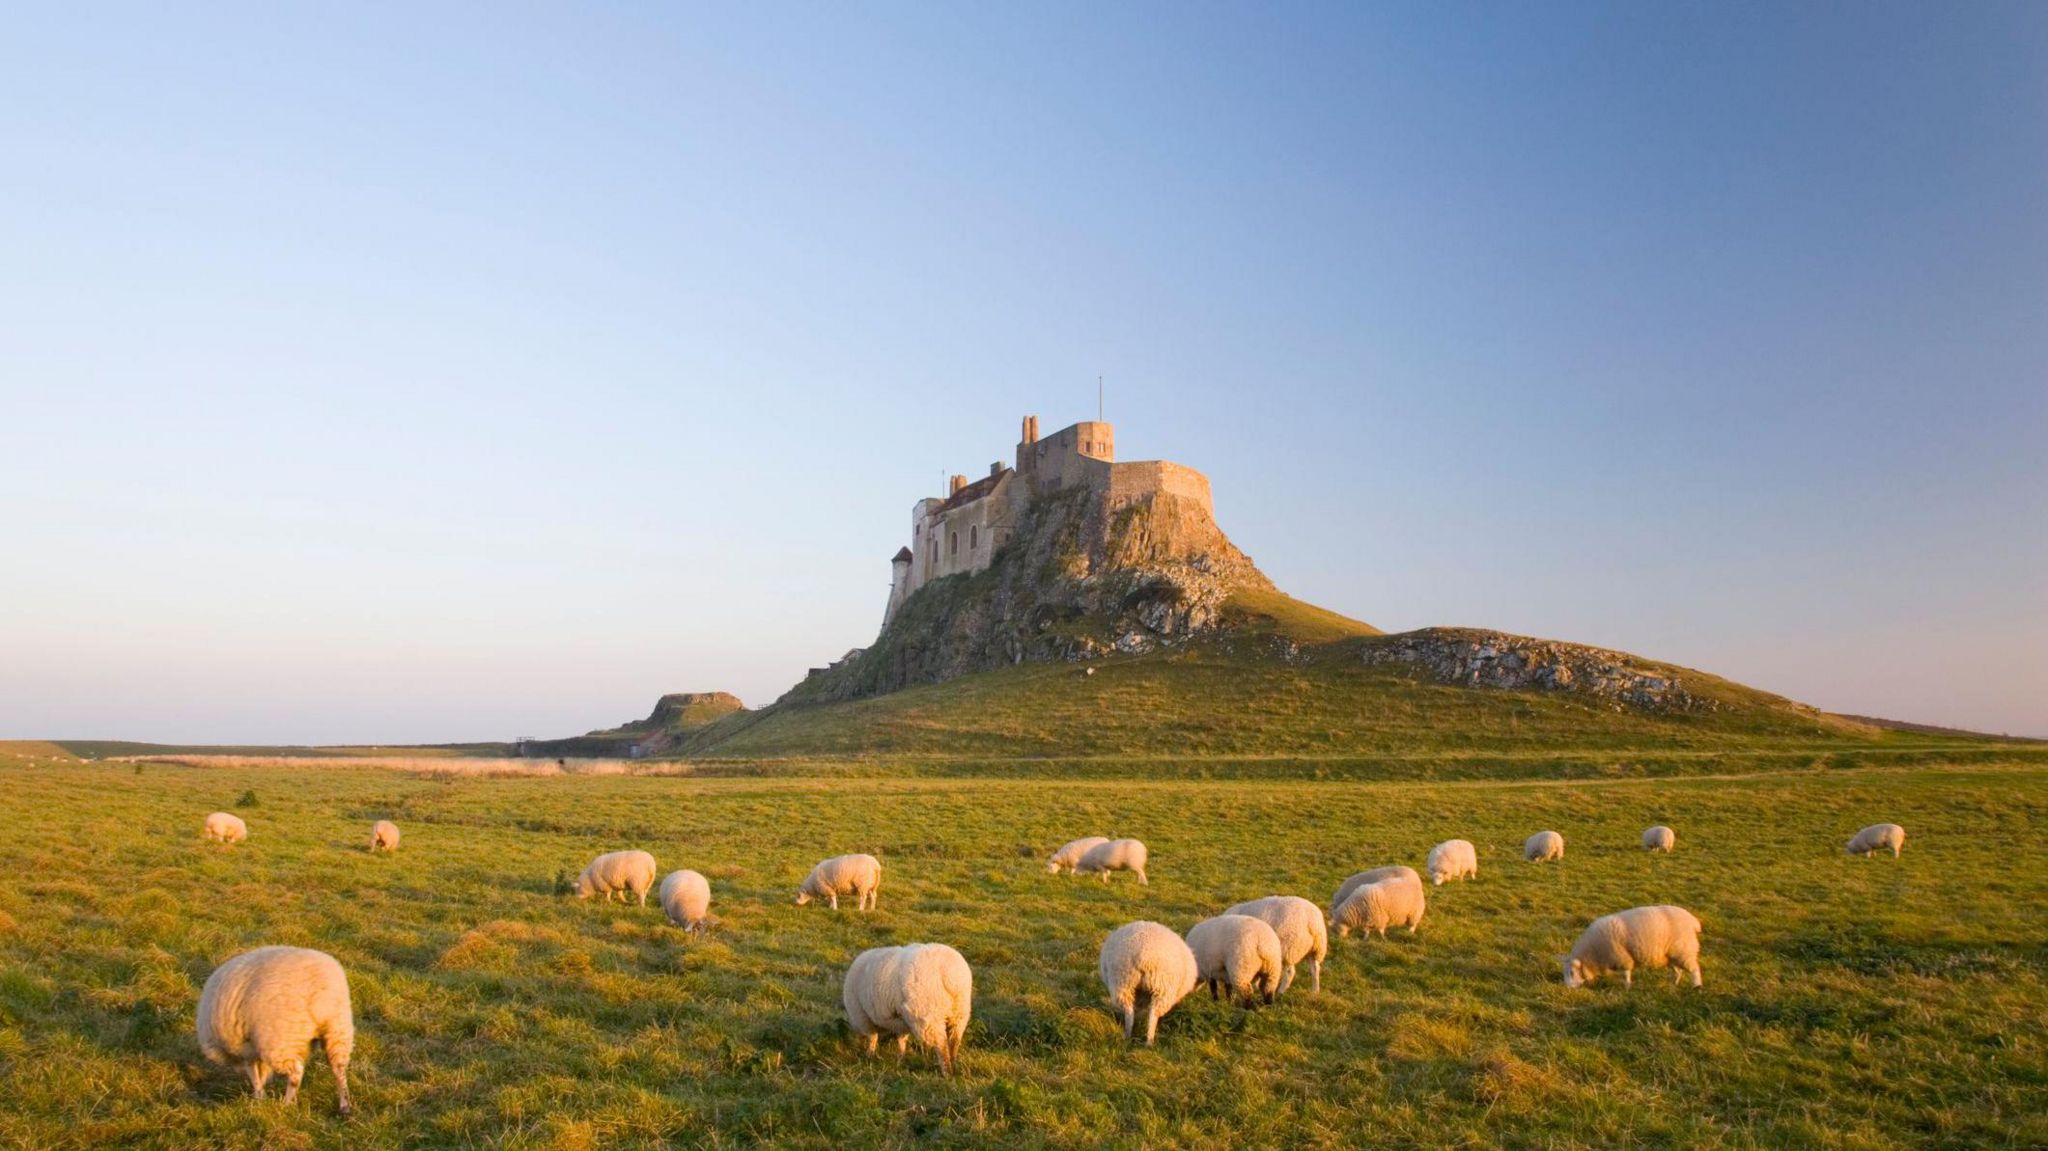 Sheep nibble grass wiht a castle atop a rocky outcrop in the background